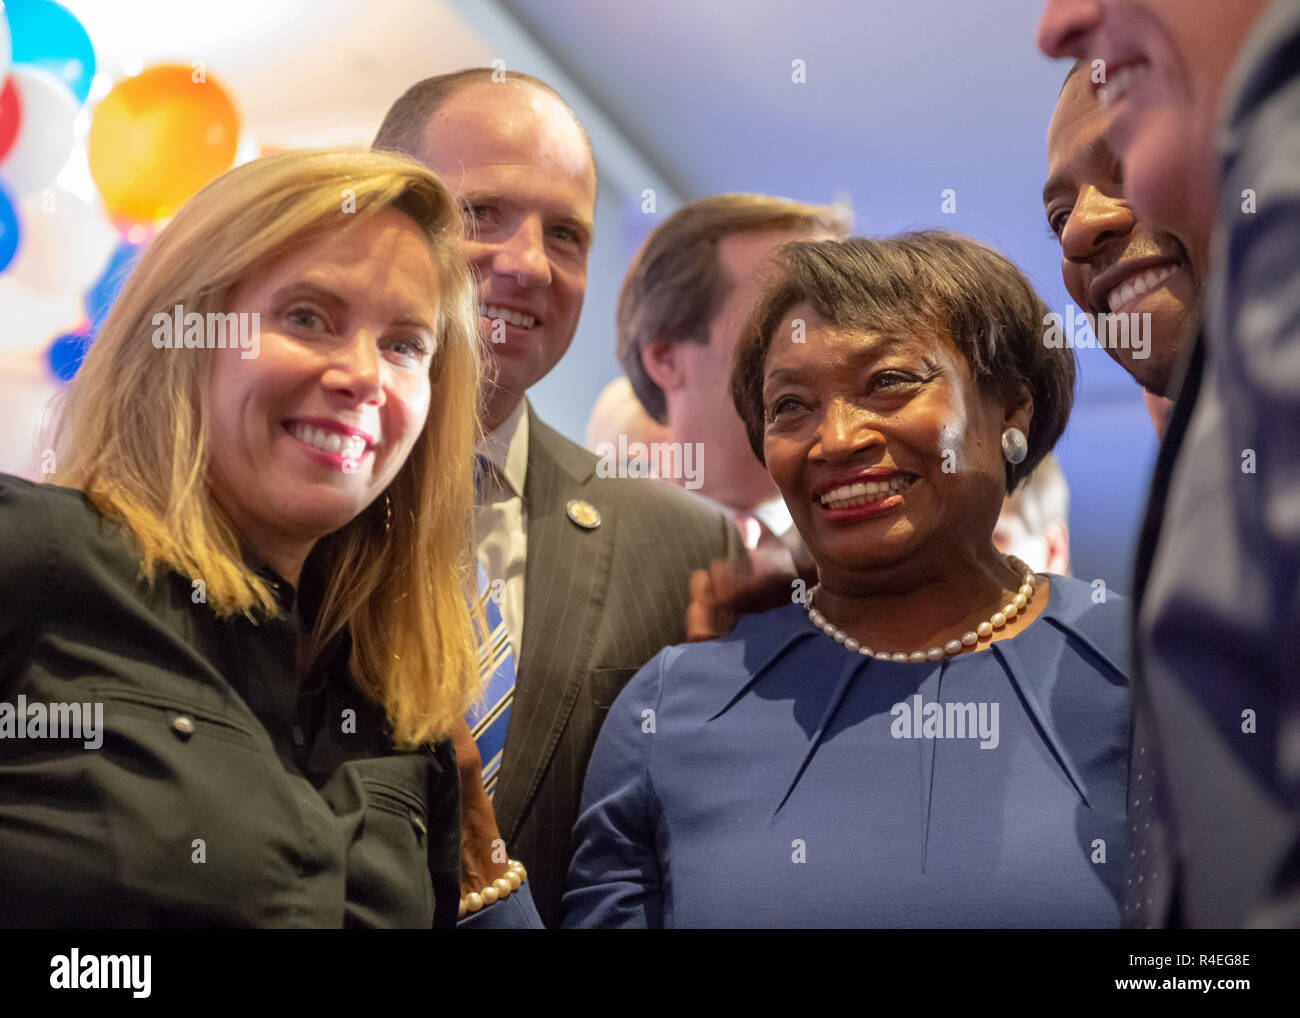 November 6, 2018 - Garden City, New York, United States - At center, ANDREA STEWART-COUSINS, who represents District 35 in the New York State Senate and serves as Senate Democratic Leader, and, at left, Hempstead Town Supervisor LAURA GILLEN, are on stage with other candidates and elected officials. Nassau County Democrats watched Election Day results at Garden City Hotel, Long Island. (Credit Image: © Ann Parry/ZUMA Wire) Stock Photo